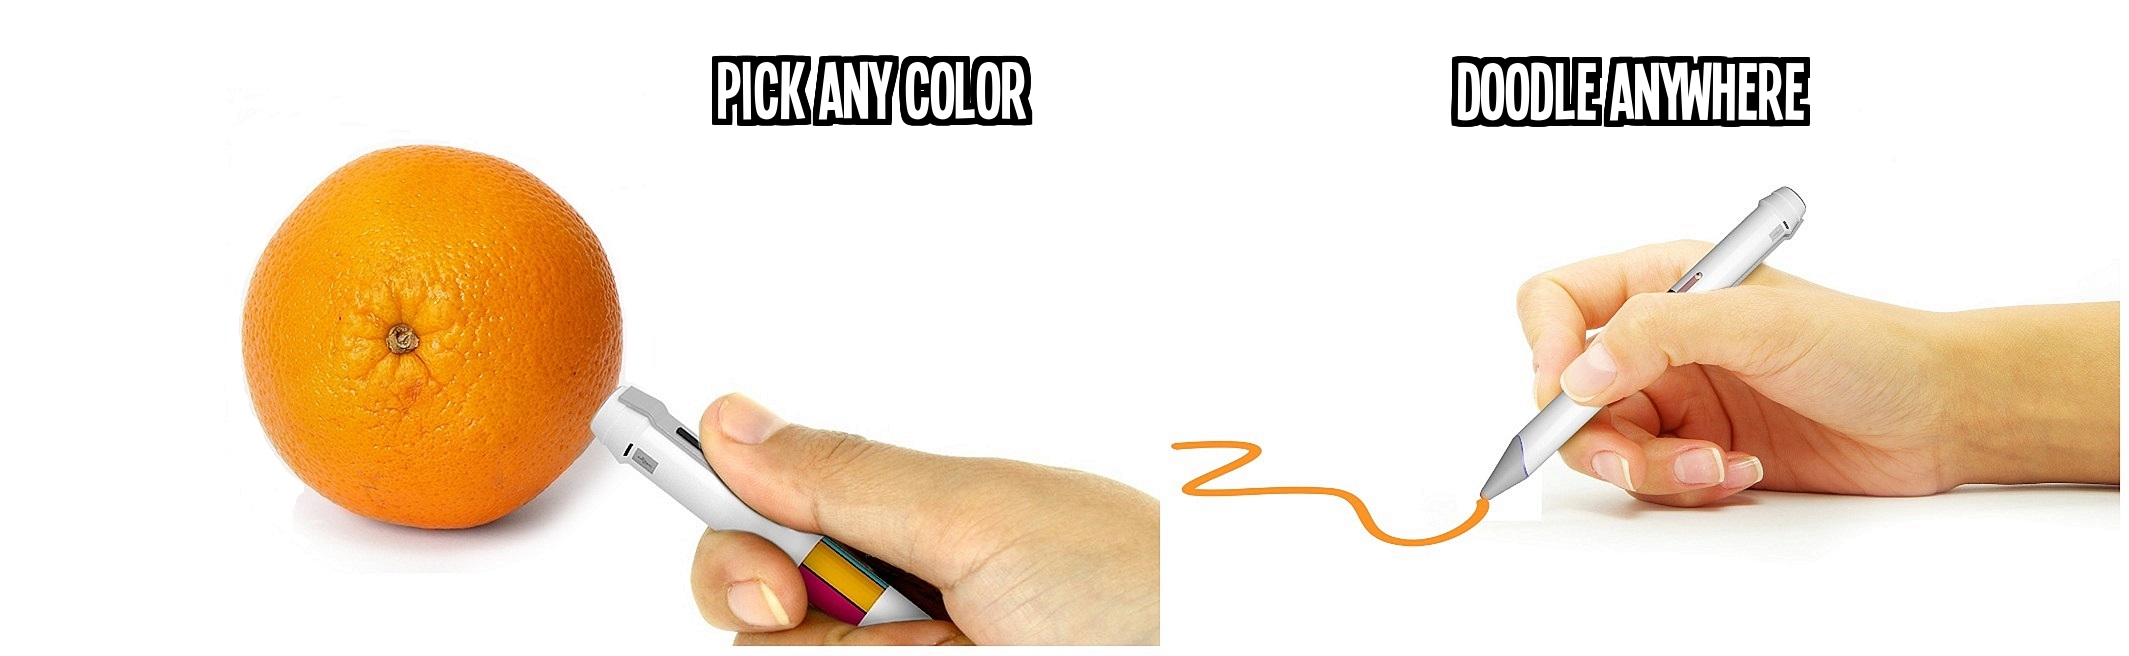 Pick any color and draw using that color'